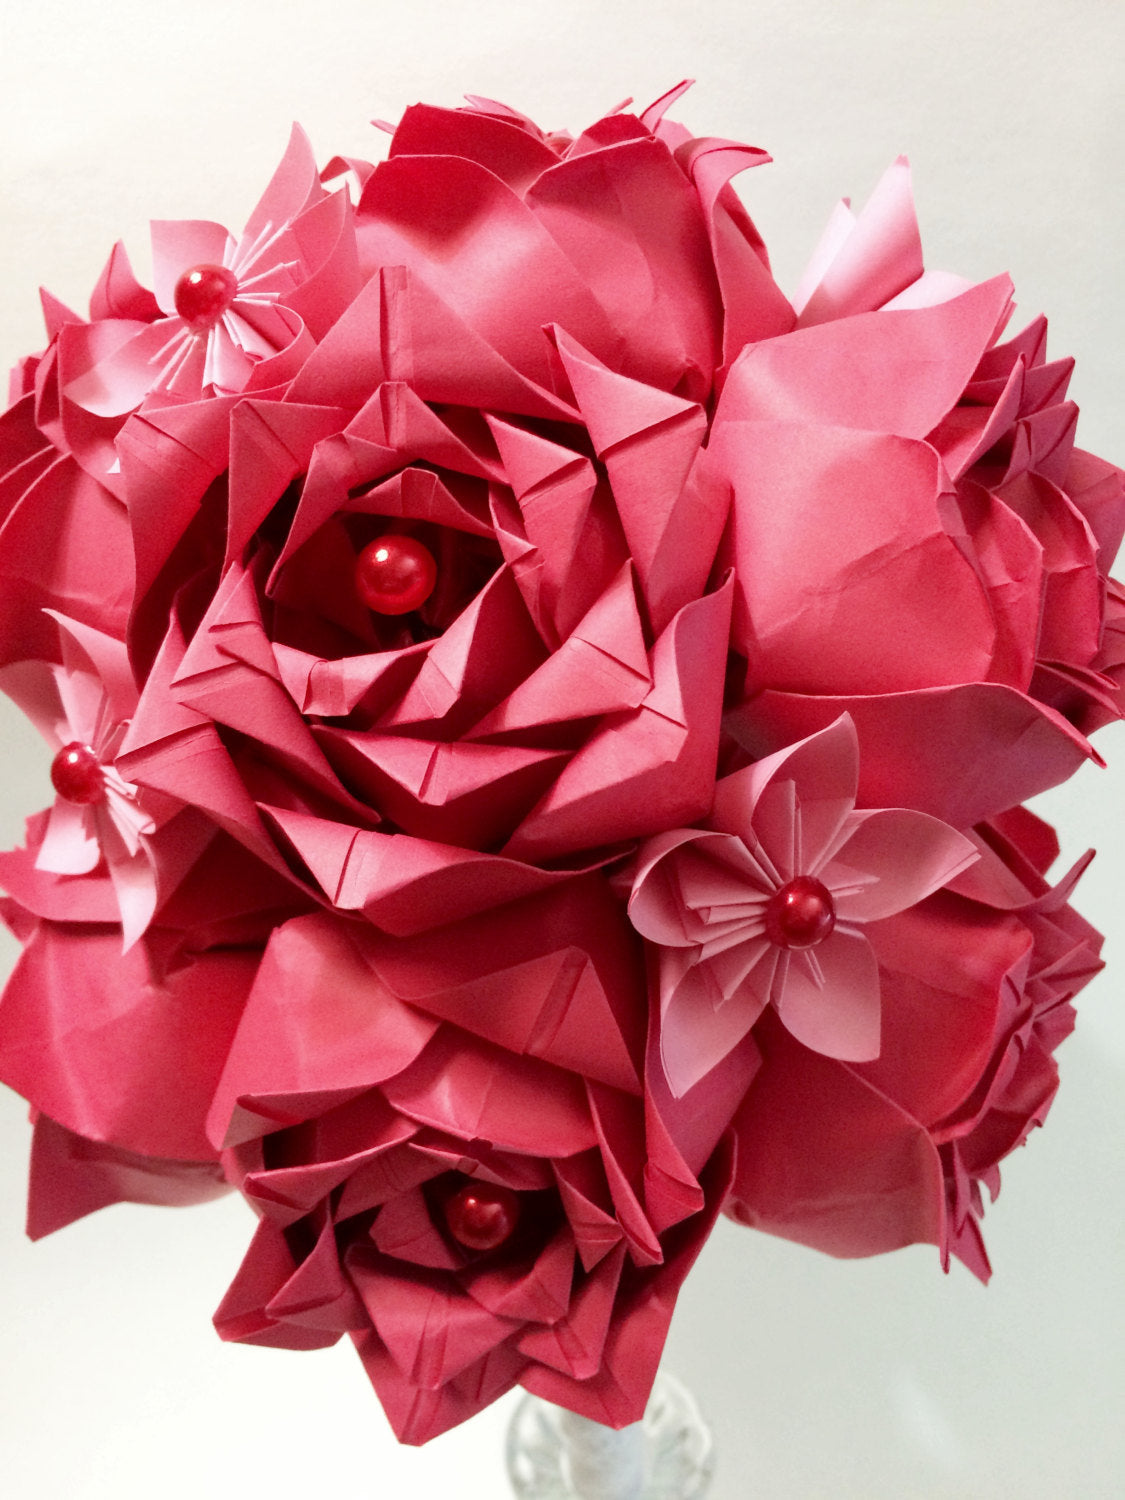 Paper Rose Bouquet Handmade Paper Flowers for Anniversary, Wedding, Home  Decoration or Gift 